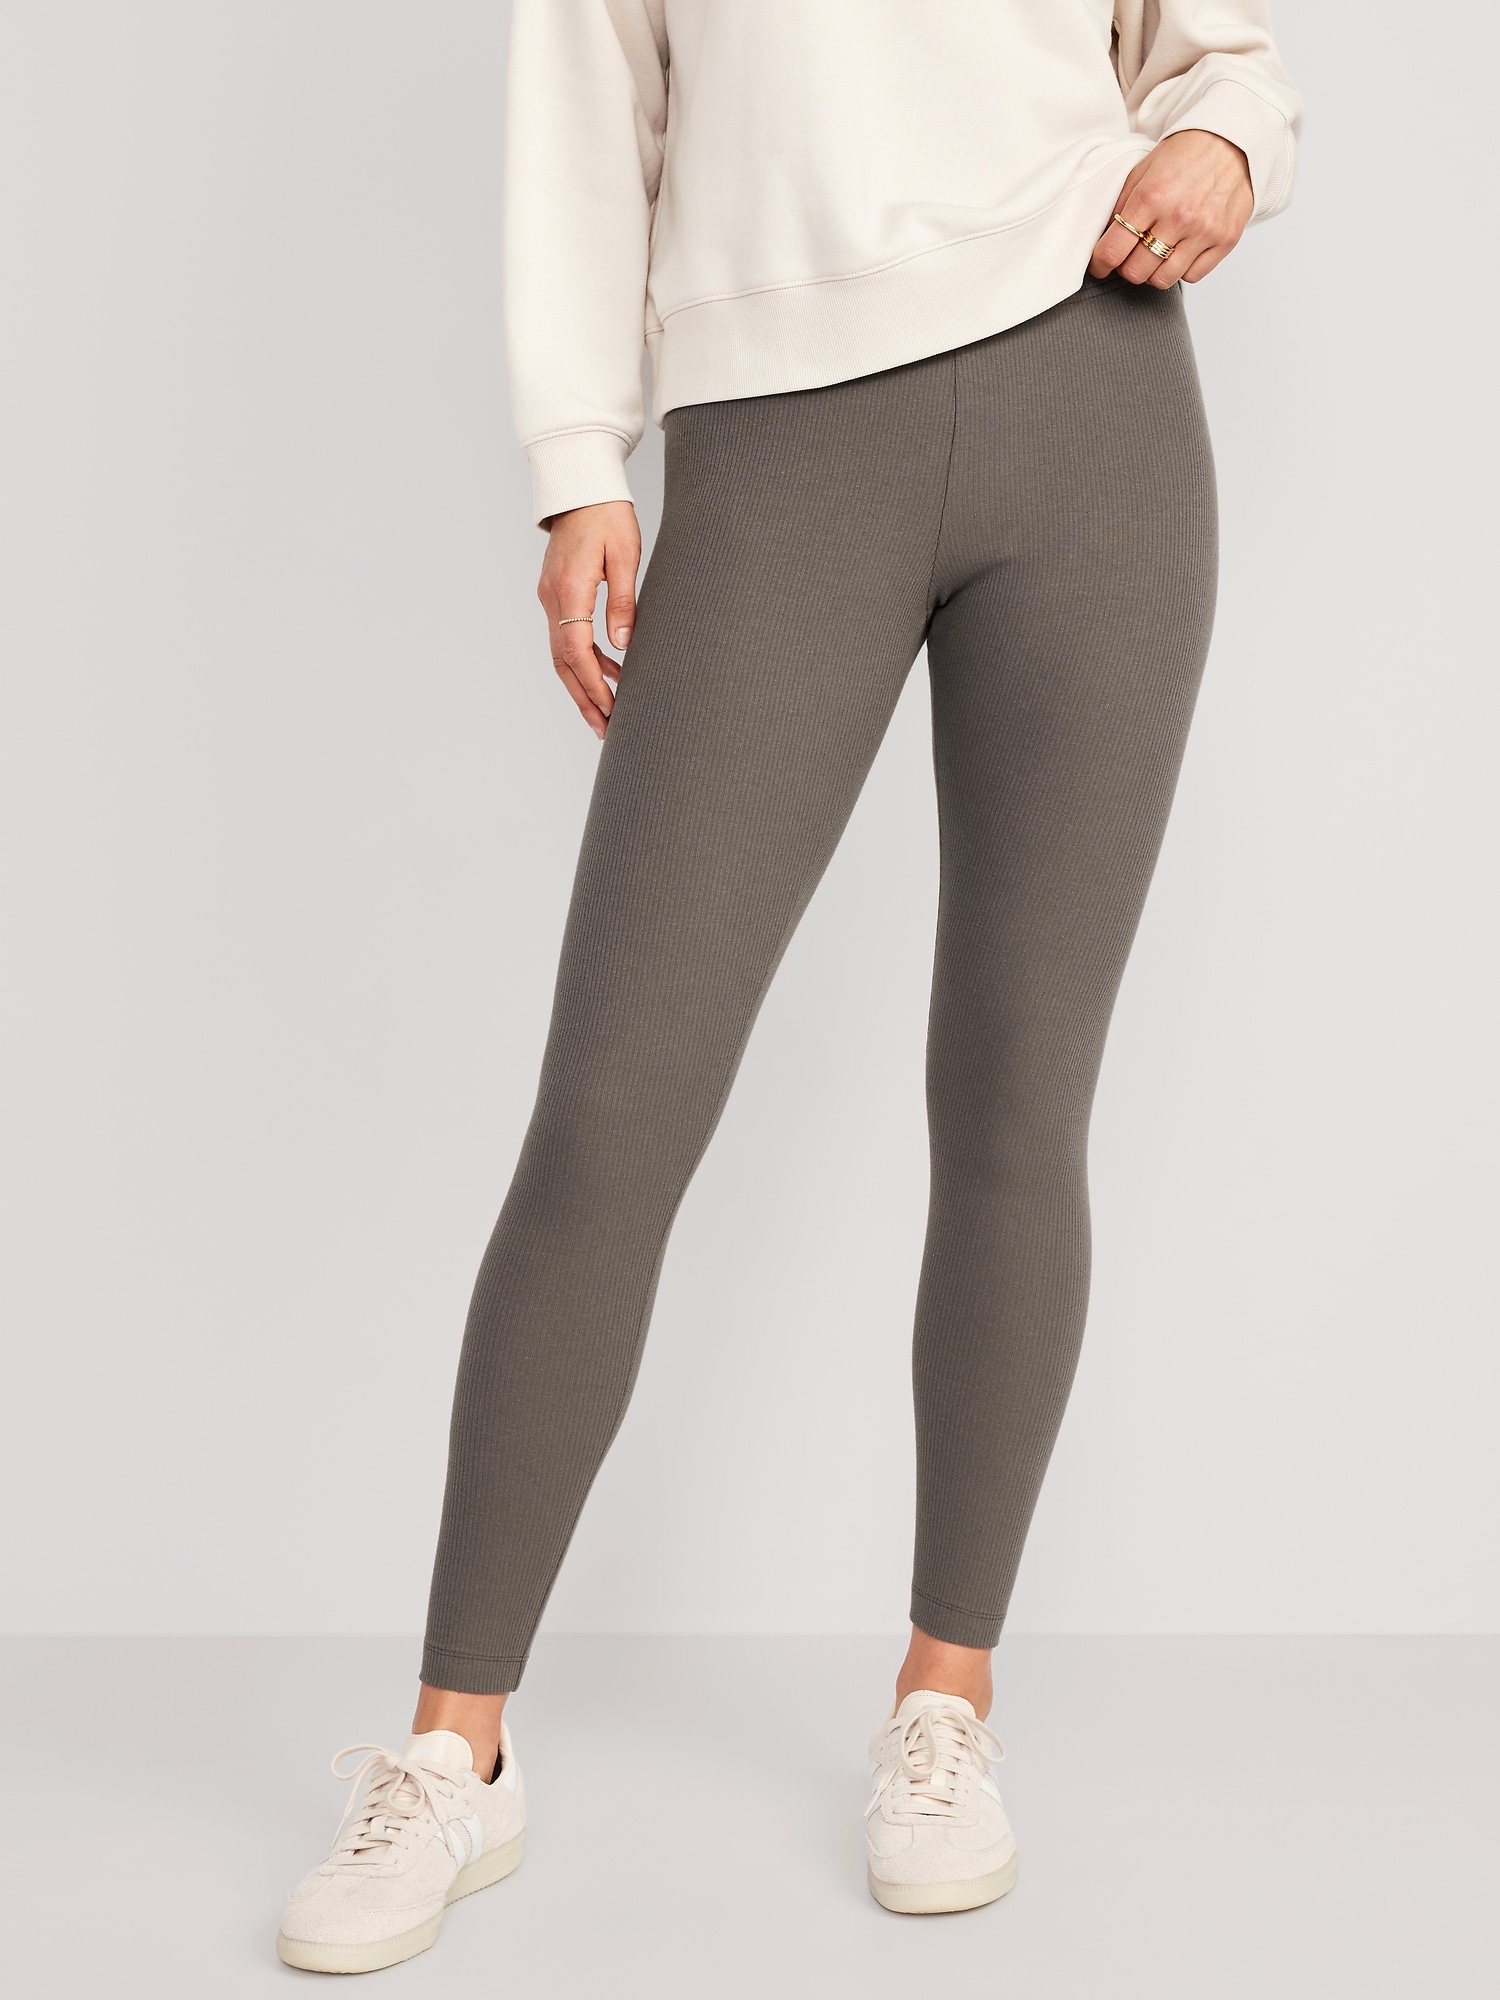 High Waisted Rib-Knit Leggings For Women Old Navy, 41% OFF